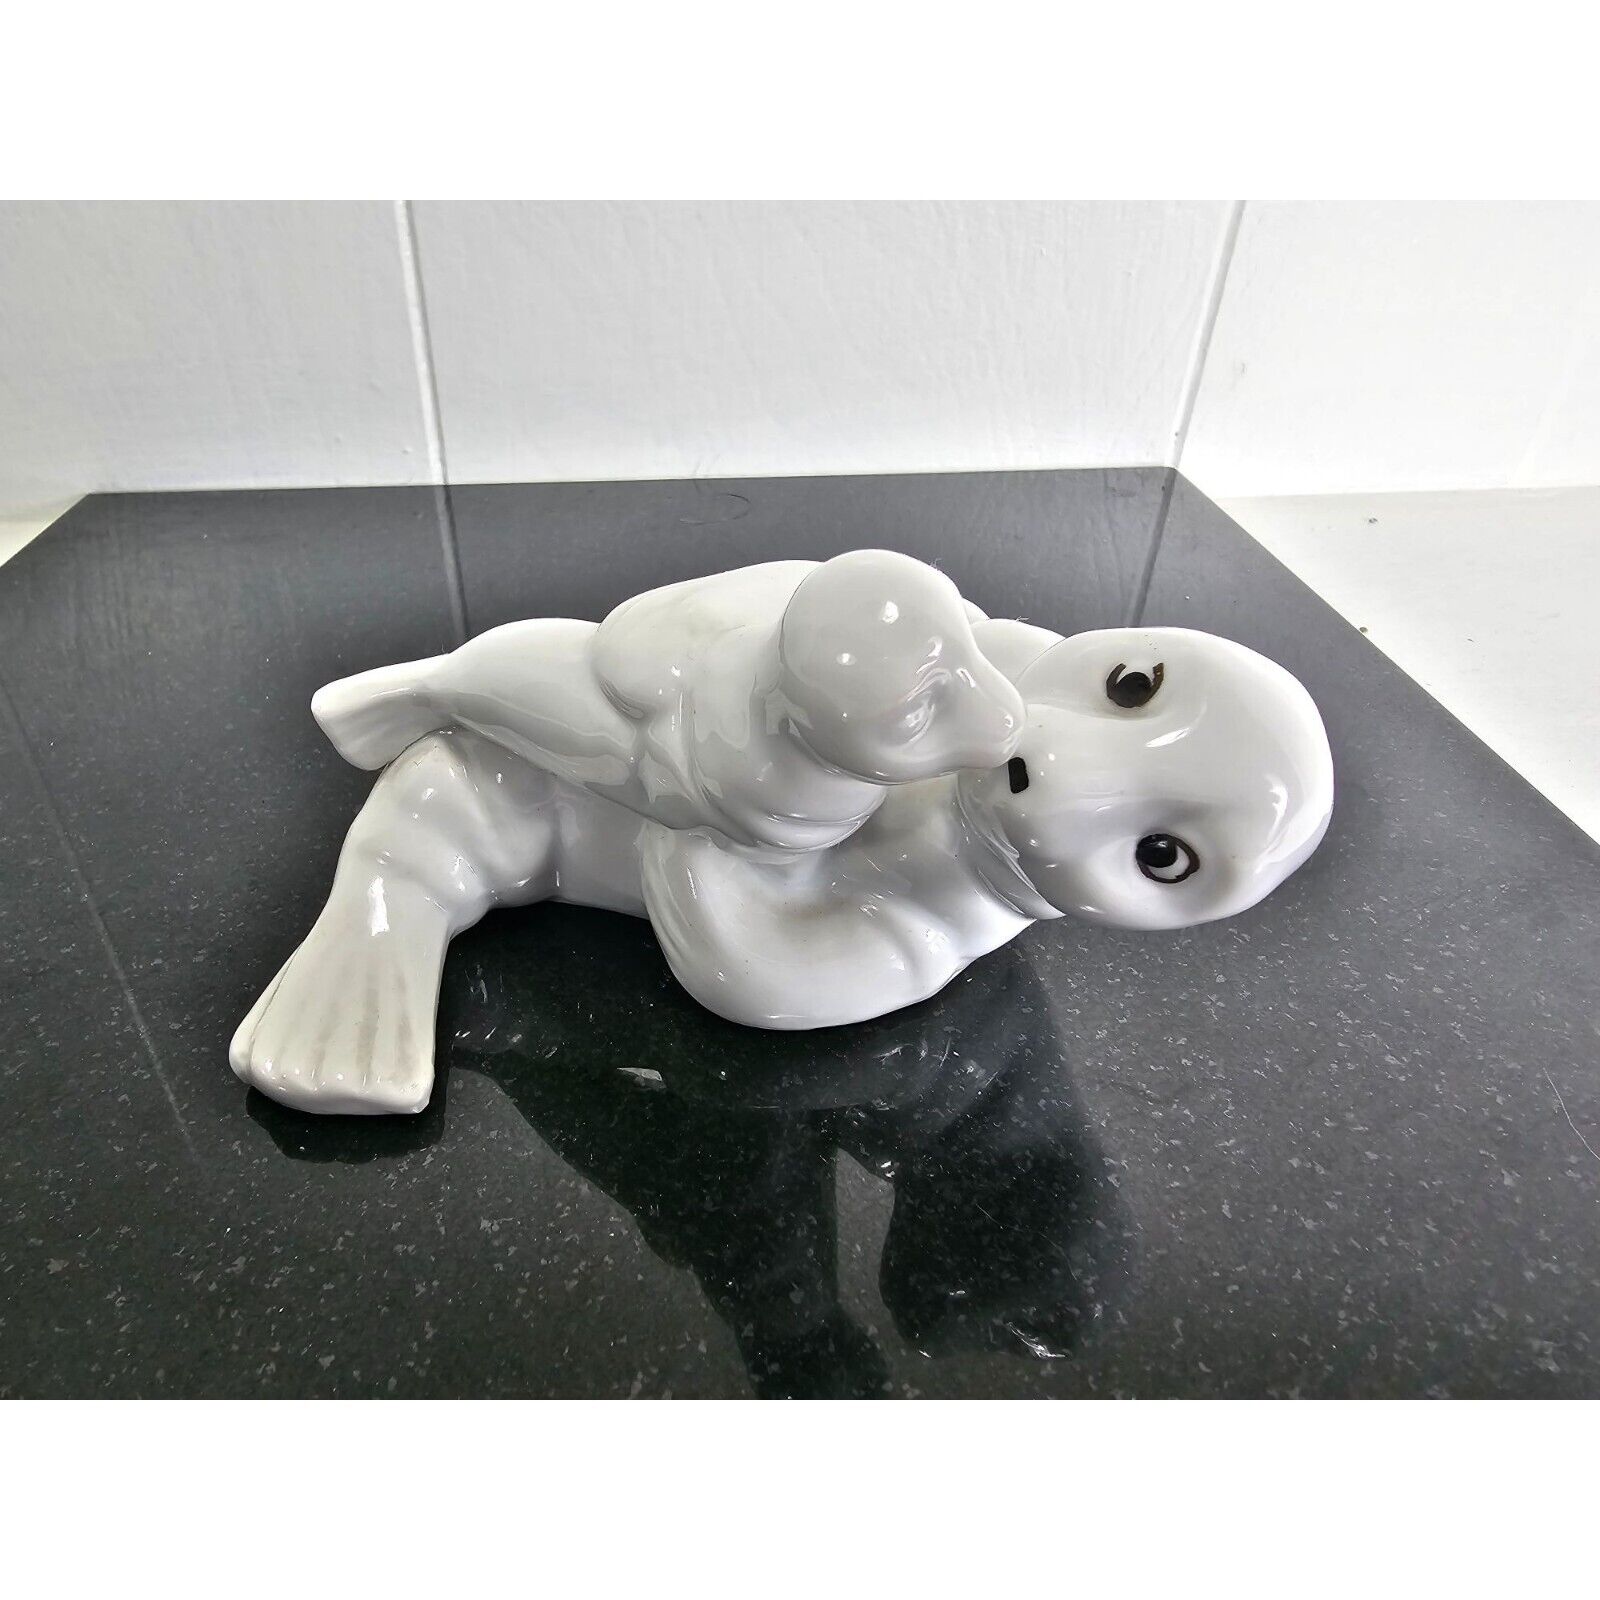 Ceramic Seals Mother and Baby Figurine Decor Vtg Signed 80s 